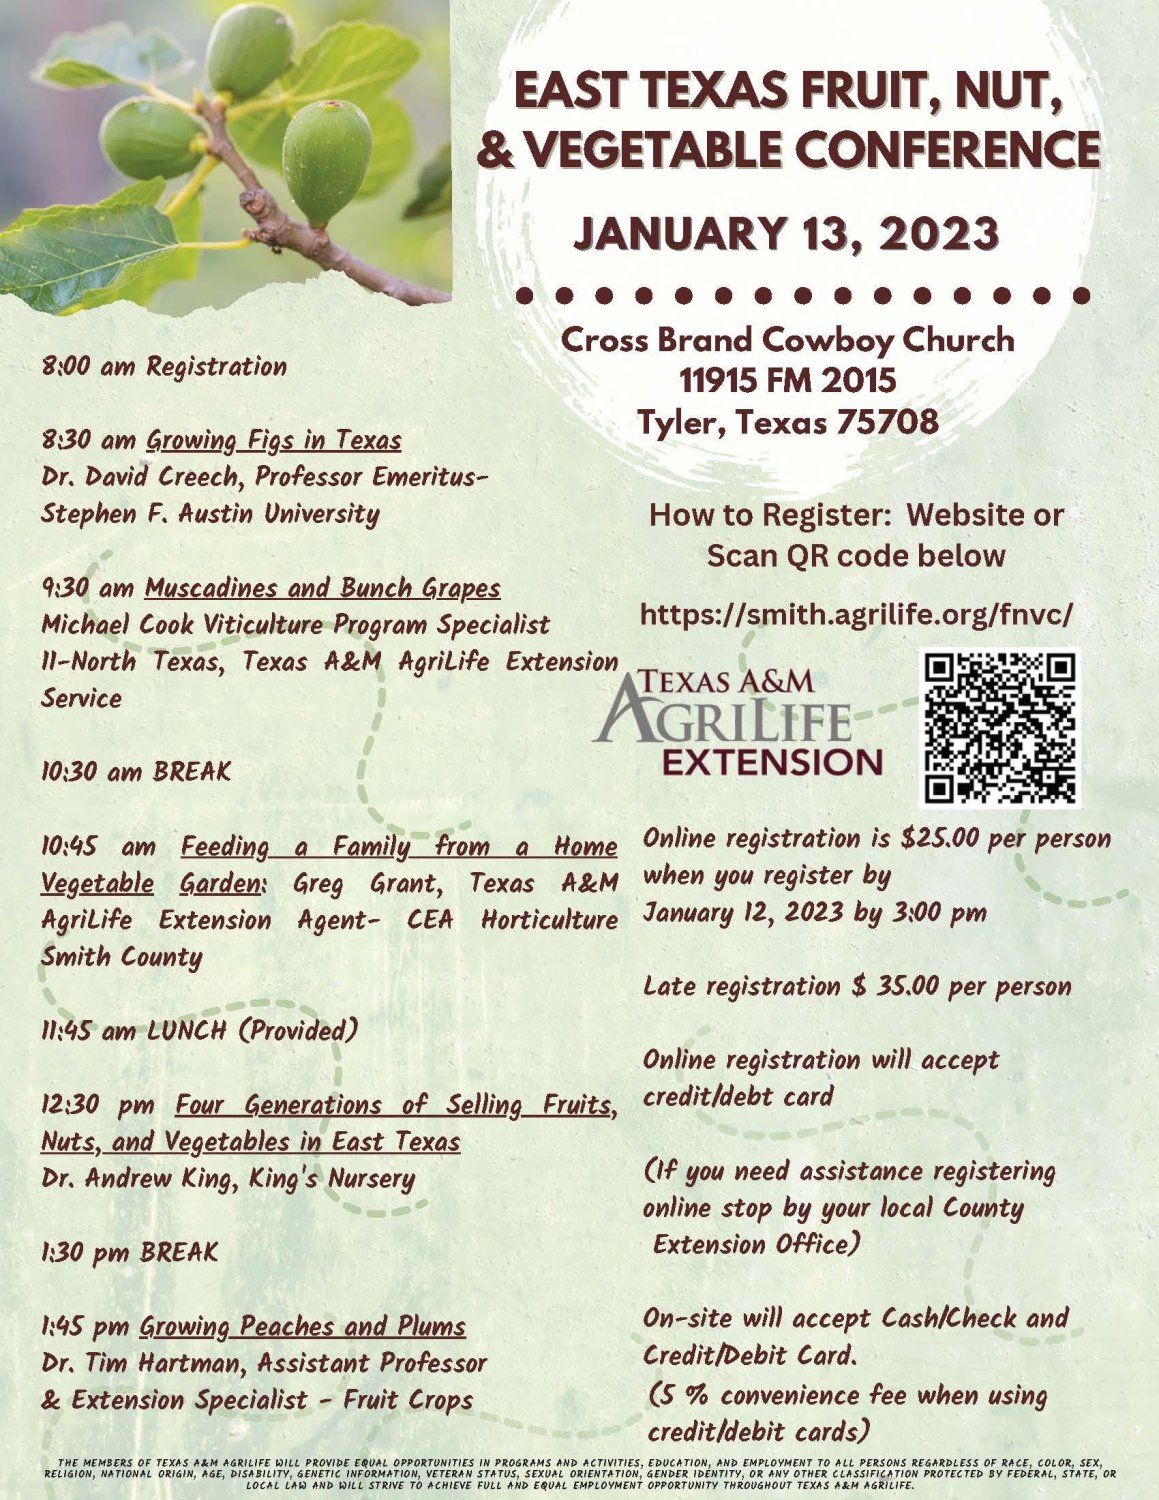 Previous Happening: Starting the New Year with an Agriculture Conference!